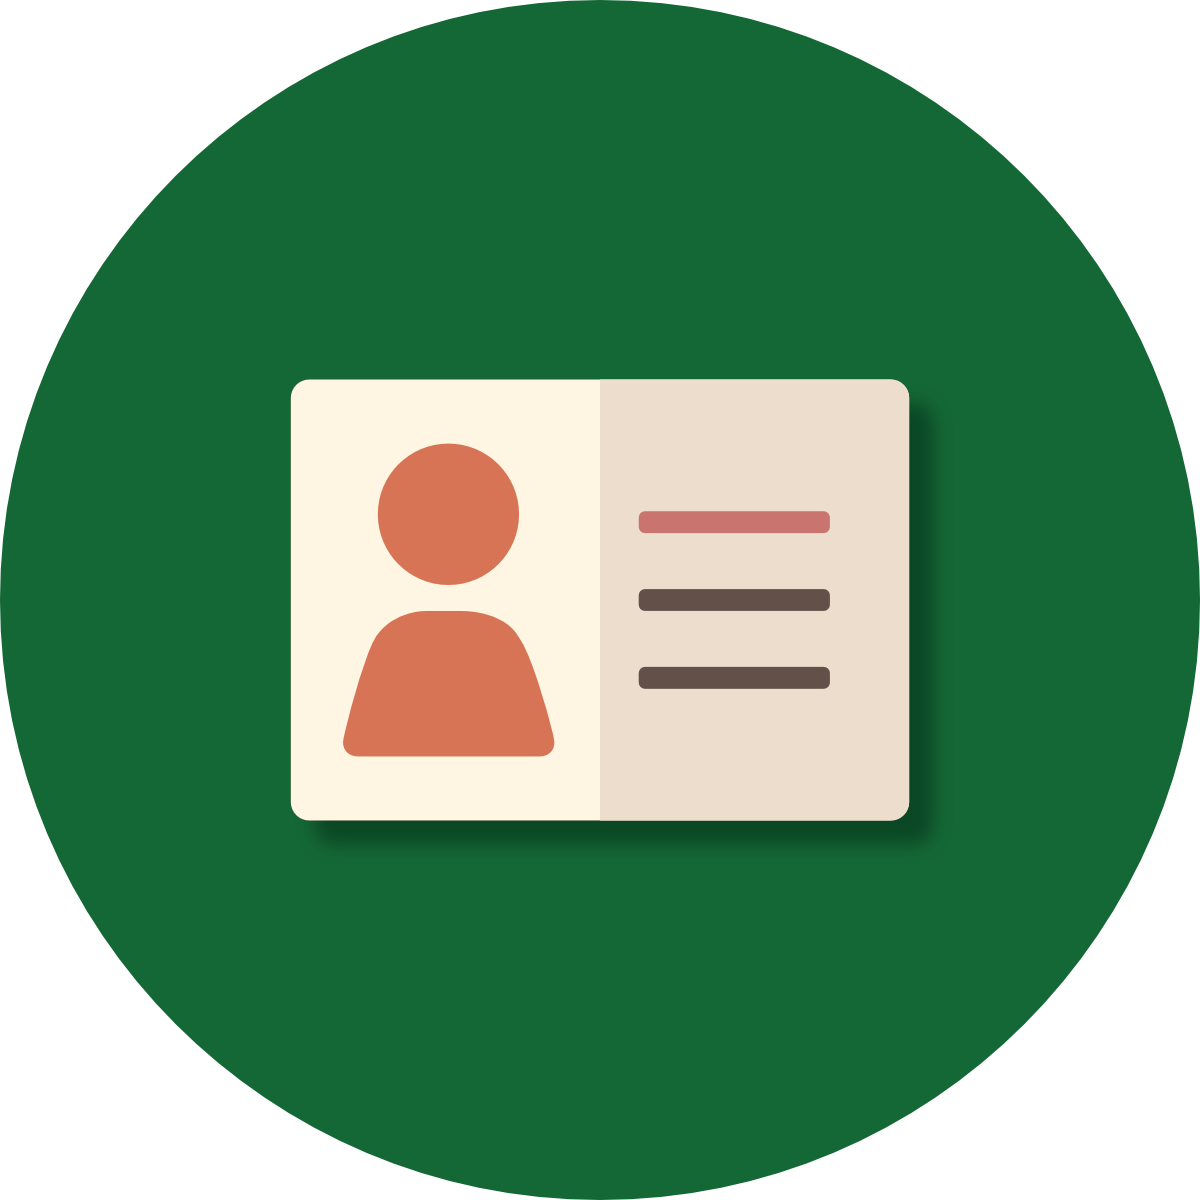 Learner-Centered icon showing a user profile sheet